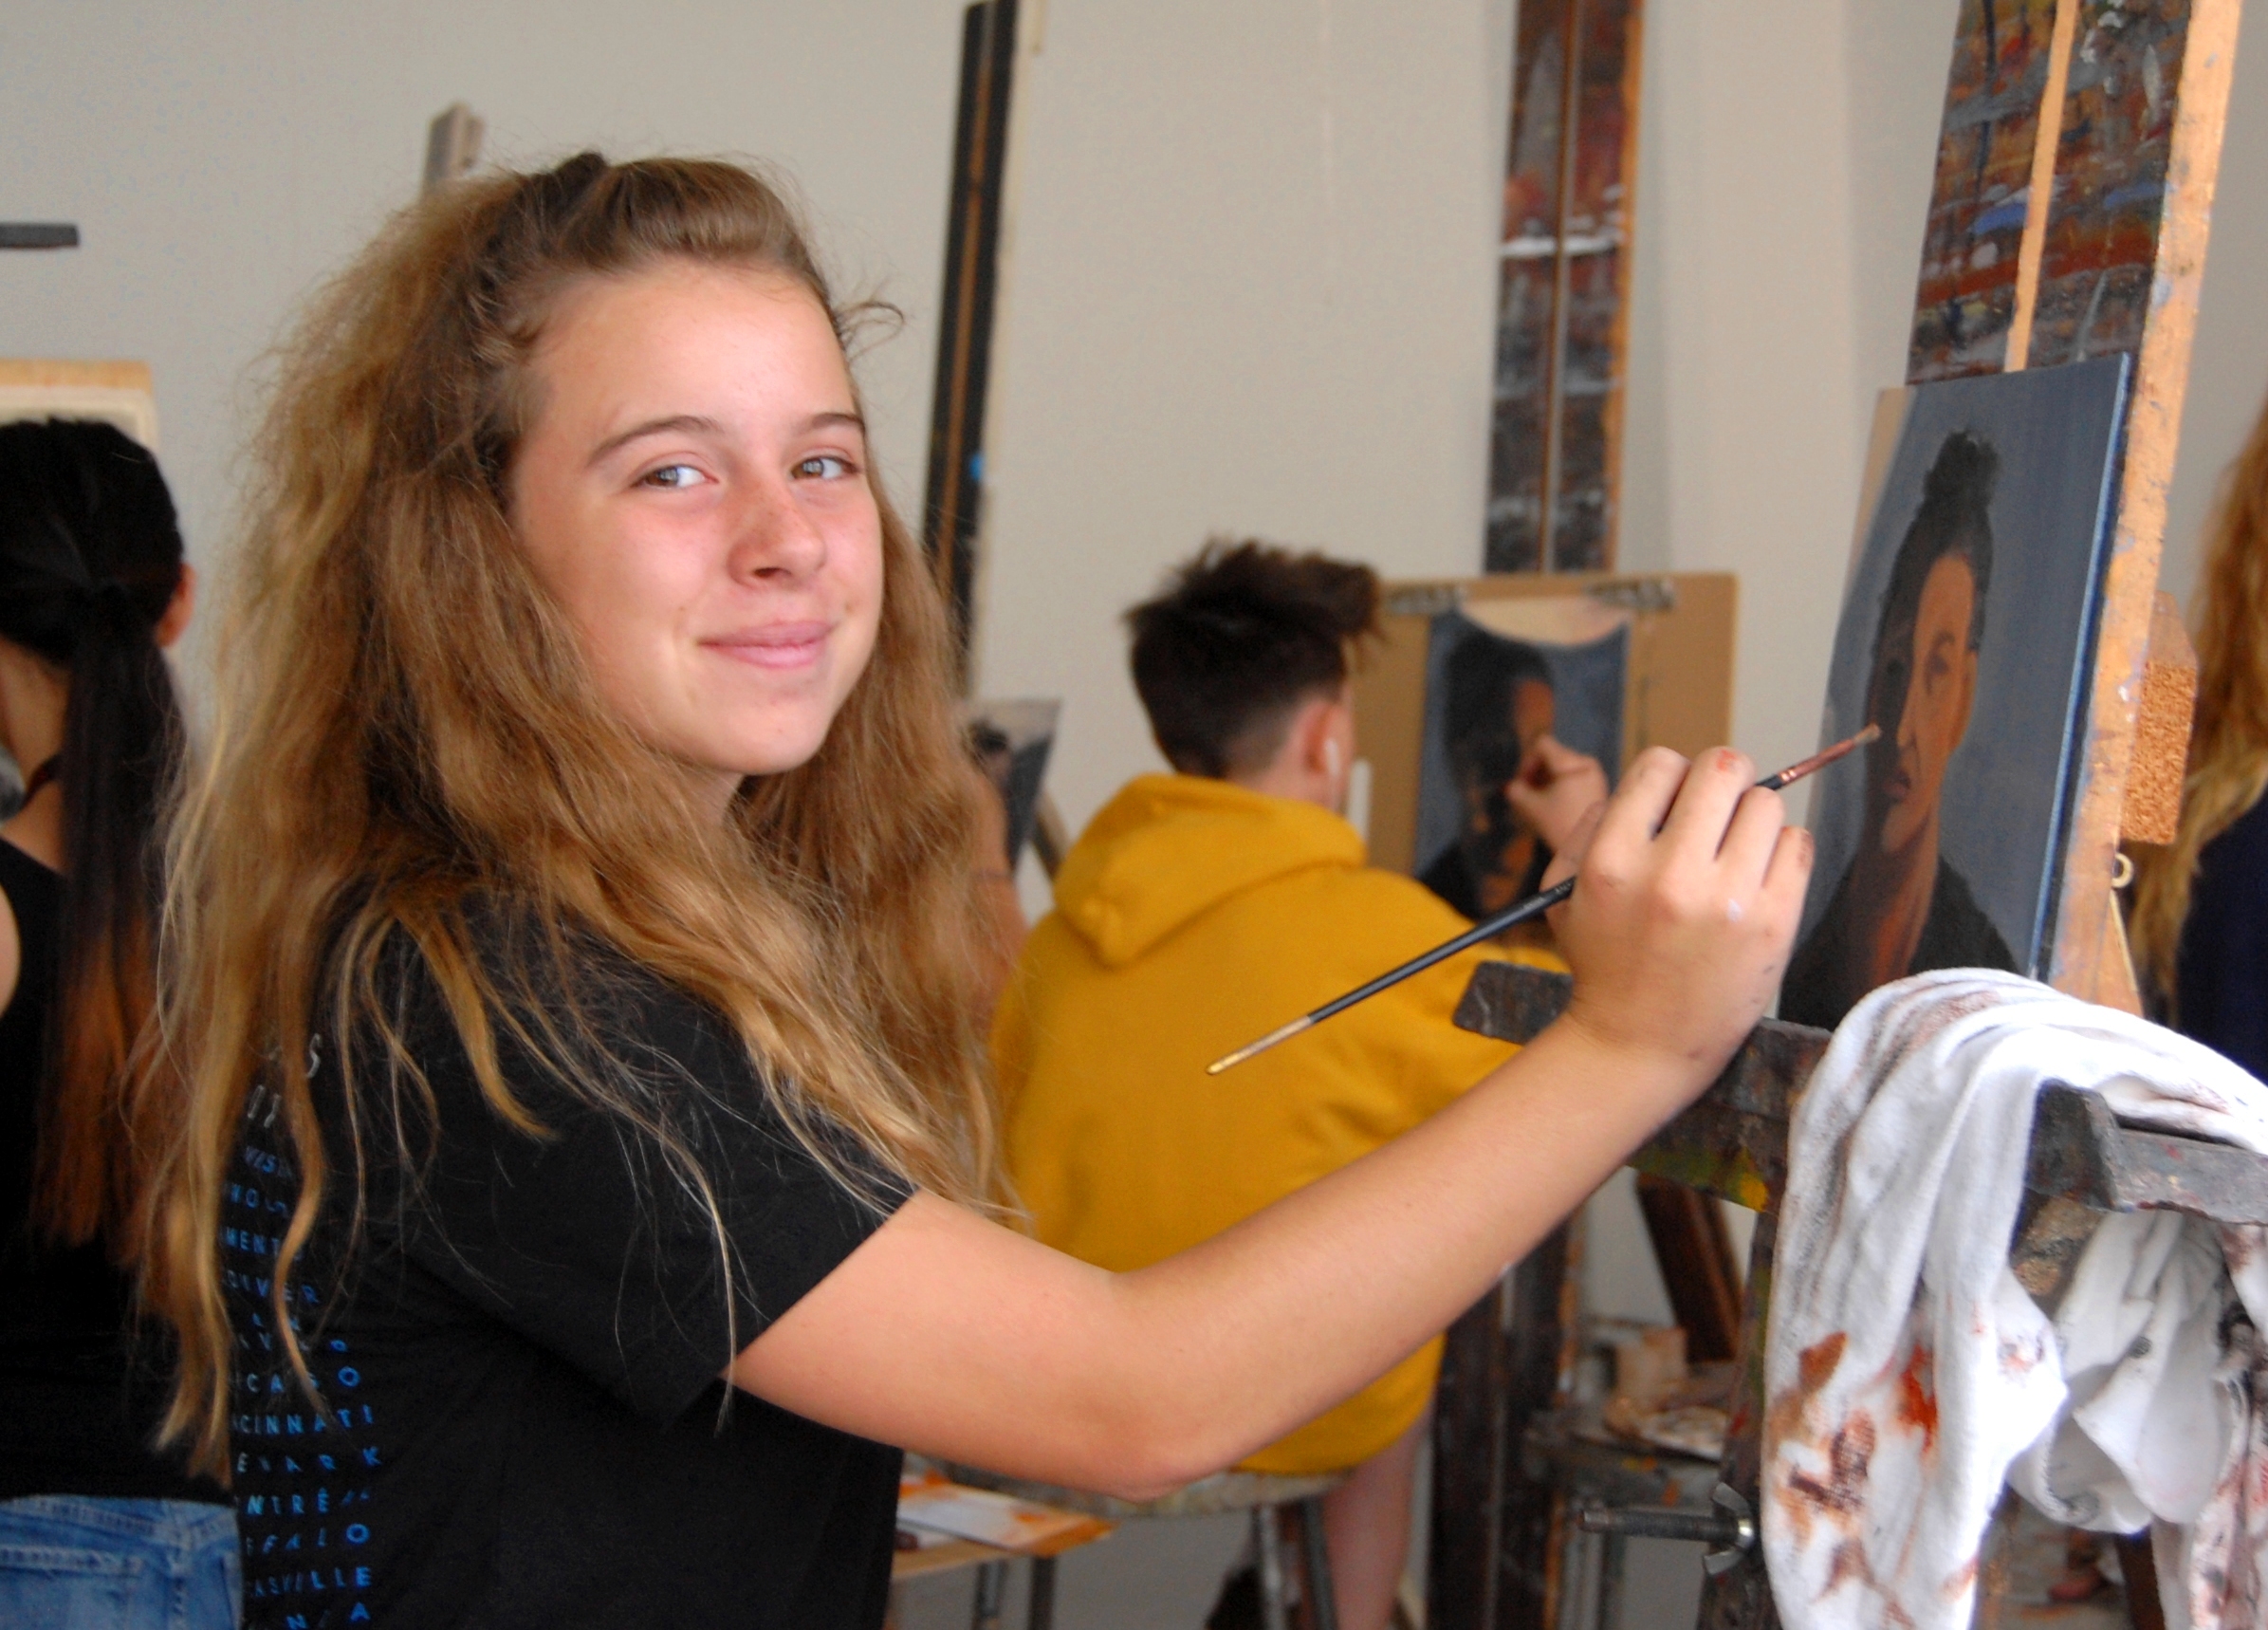 A student with long blonde hair smiles at the camera as she holds a paintbrush up to her easel, on which there is a portrait. In the background, another student in a yellow hoodie is painting a portrait.